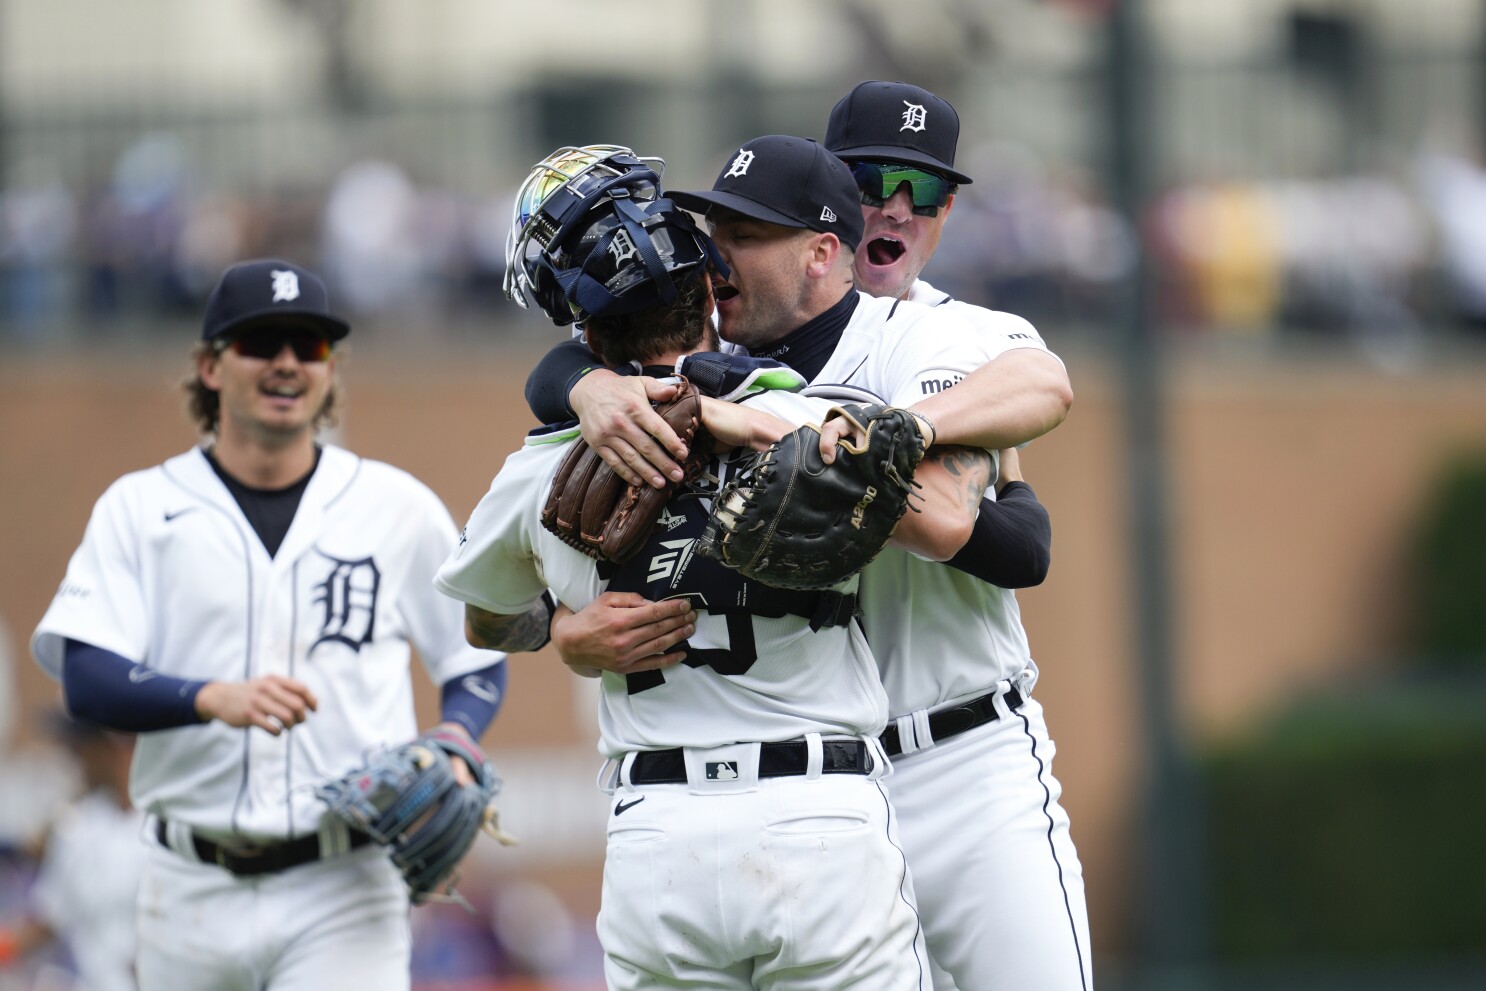 Cease, unbeaten vs Tigers, leads White Sox to 5-2 win